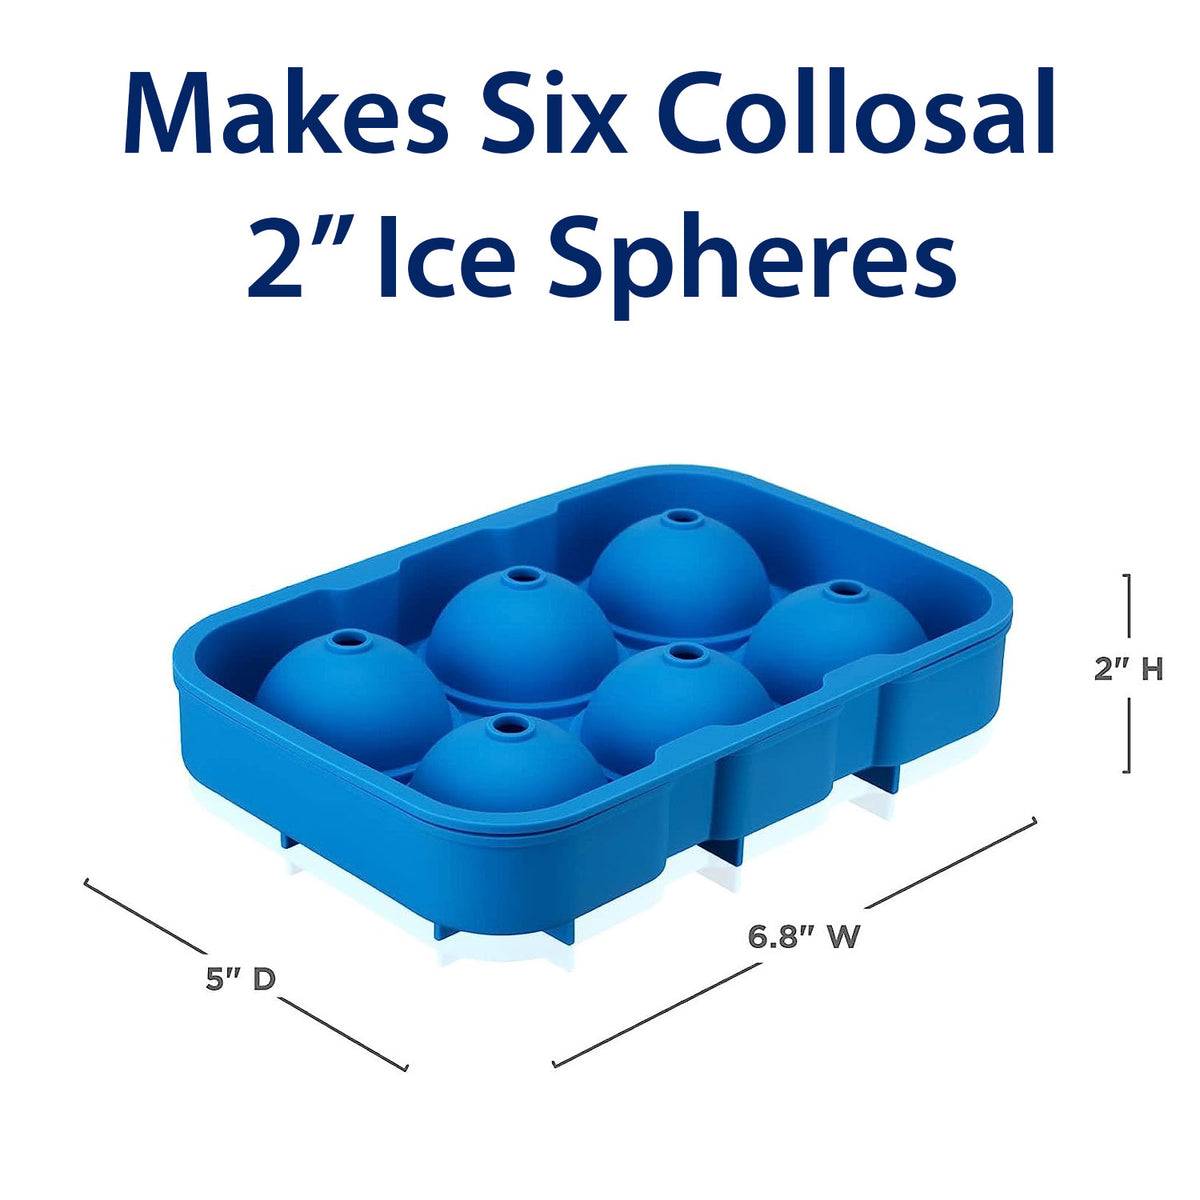 2" Silicone Ice Sphere Mold (makes 6 spheres)